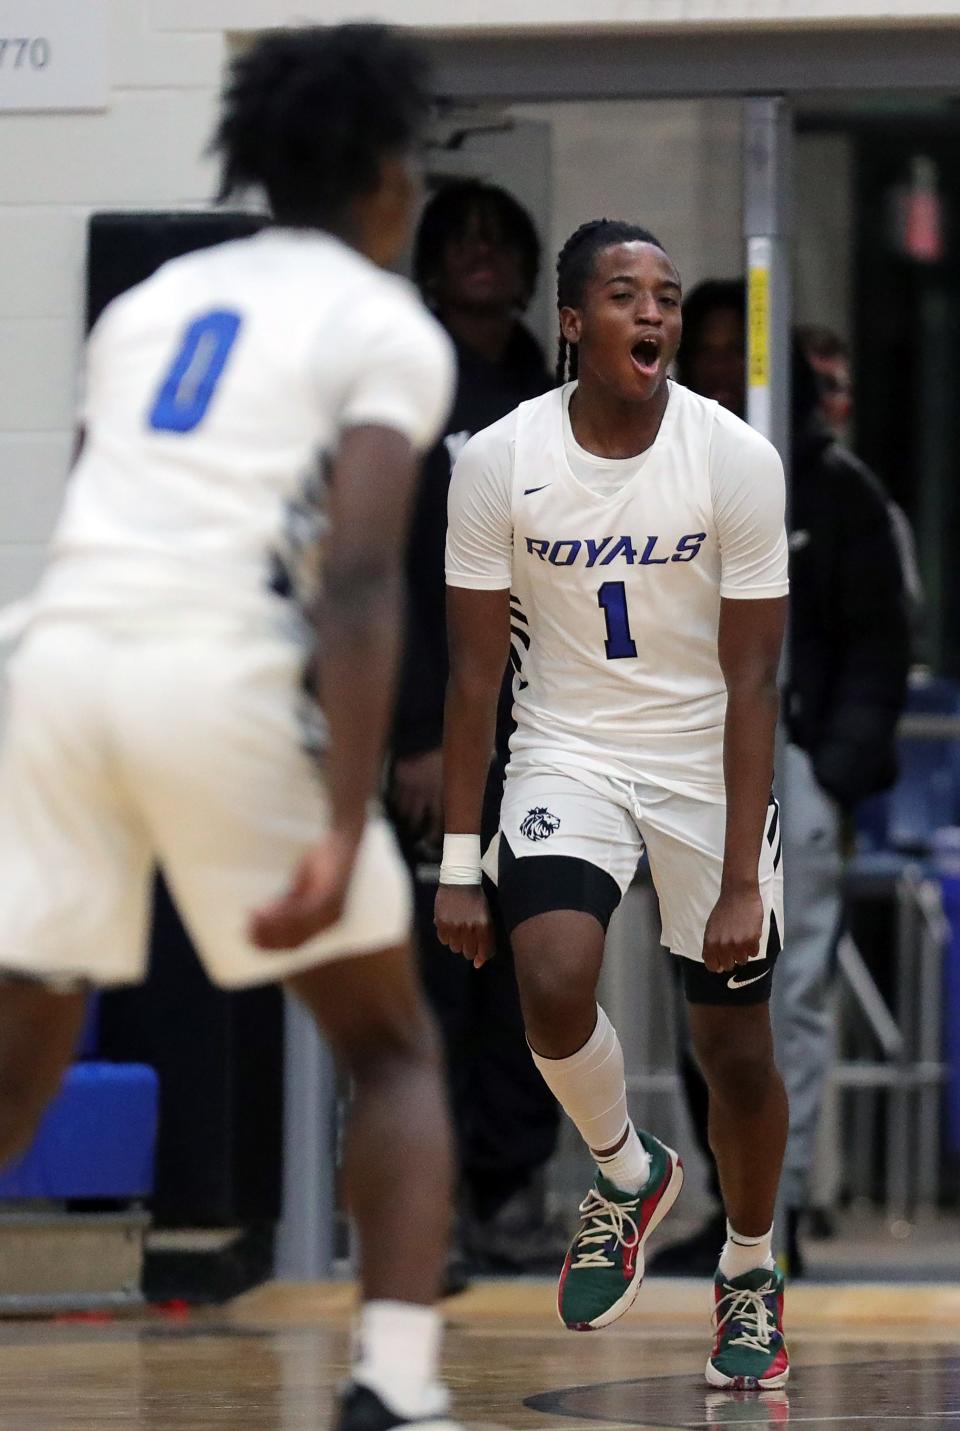 Lavelle Sharpe Jr. and Cuyahoga Valley Christian Academy rolled into the weekend undefeated and ranked seventh in the state.